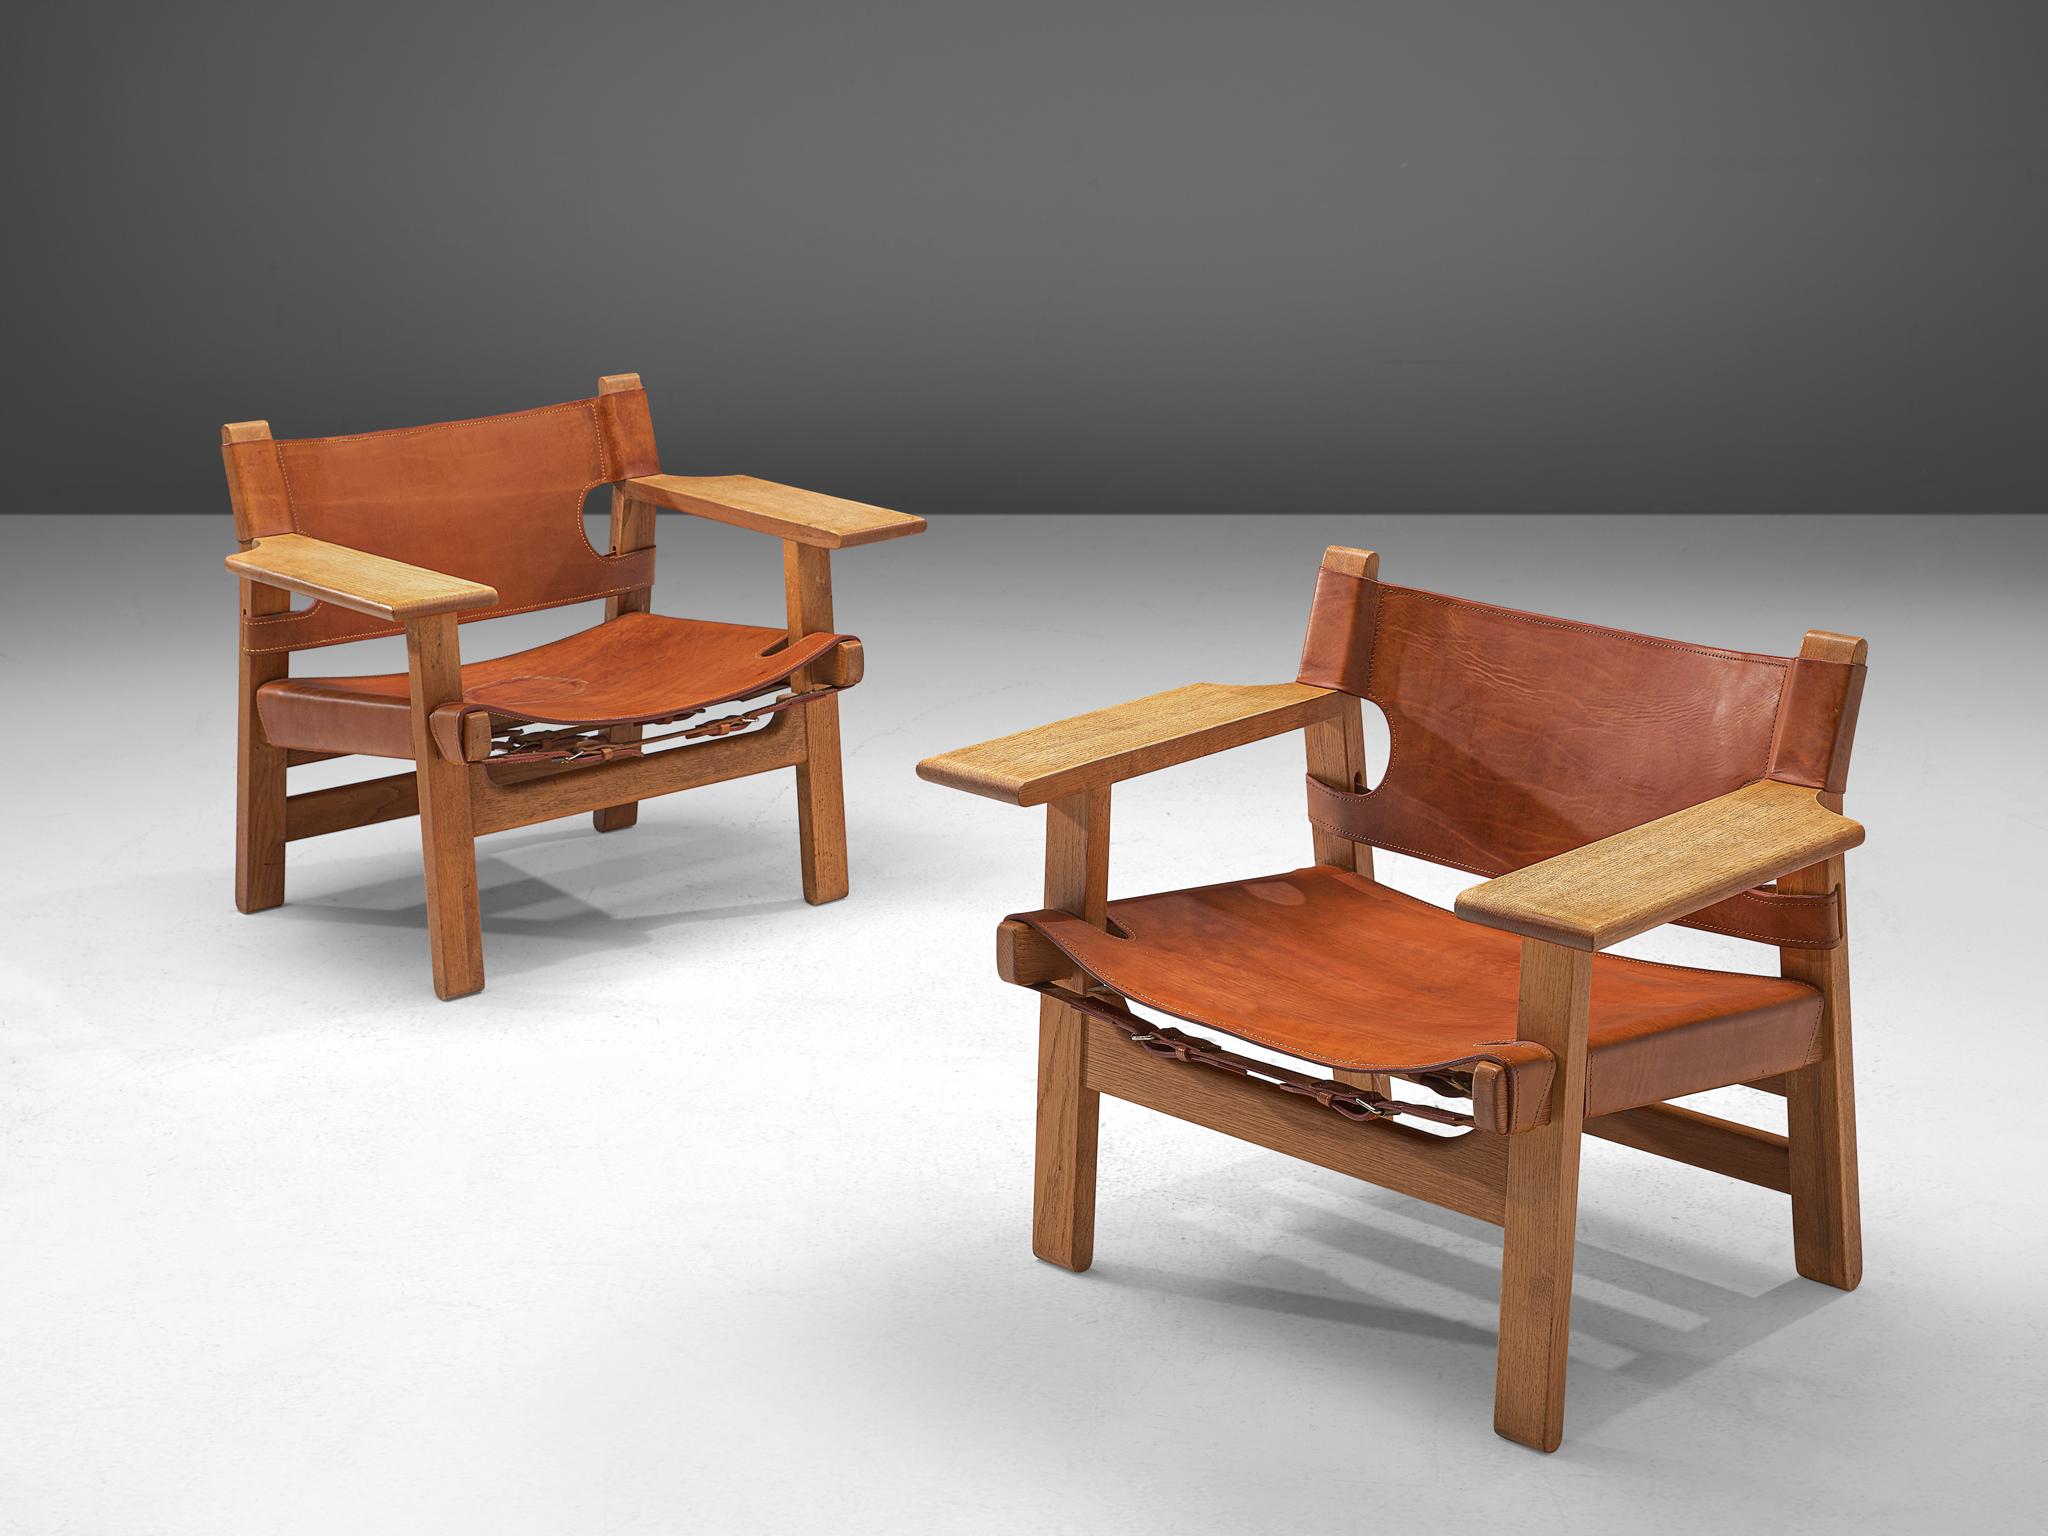 Børge Mogensen for Fredericia Stolefabrik, set of 2 'Spanish Chairs,' solid oak and cognac leather, Denmark, 1958.

This well-known design by Børge Mogensen has a very strong appearance. The sincere construction and type of upholstery, give the